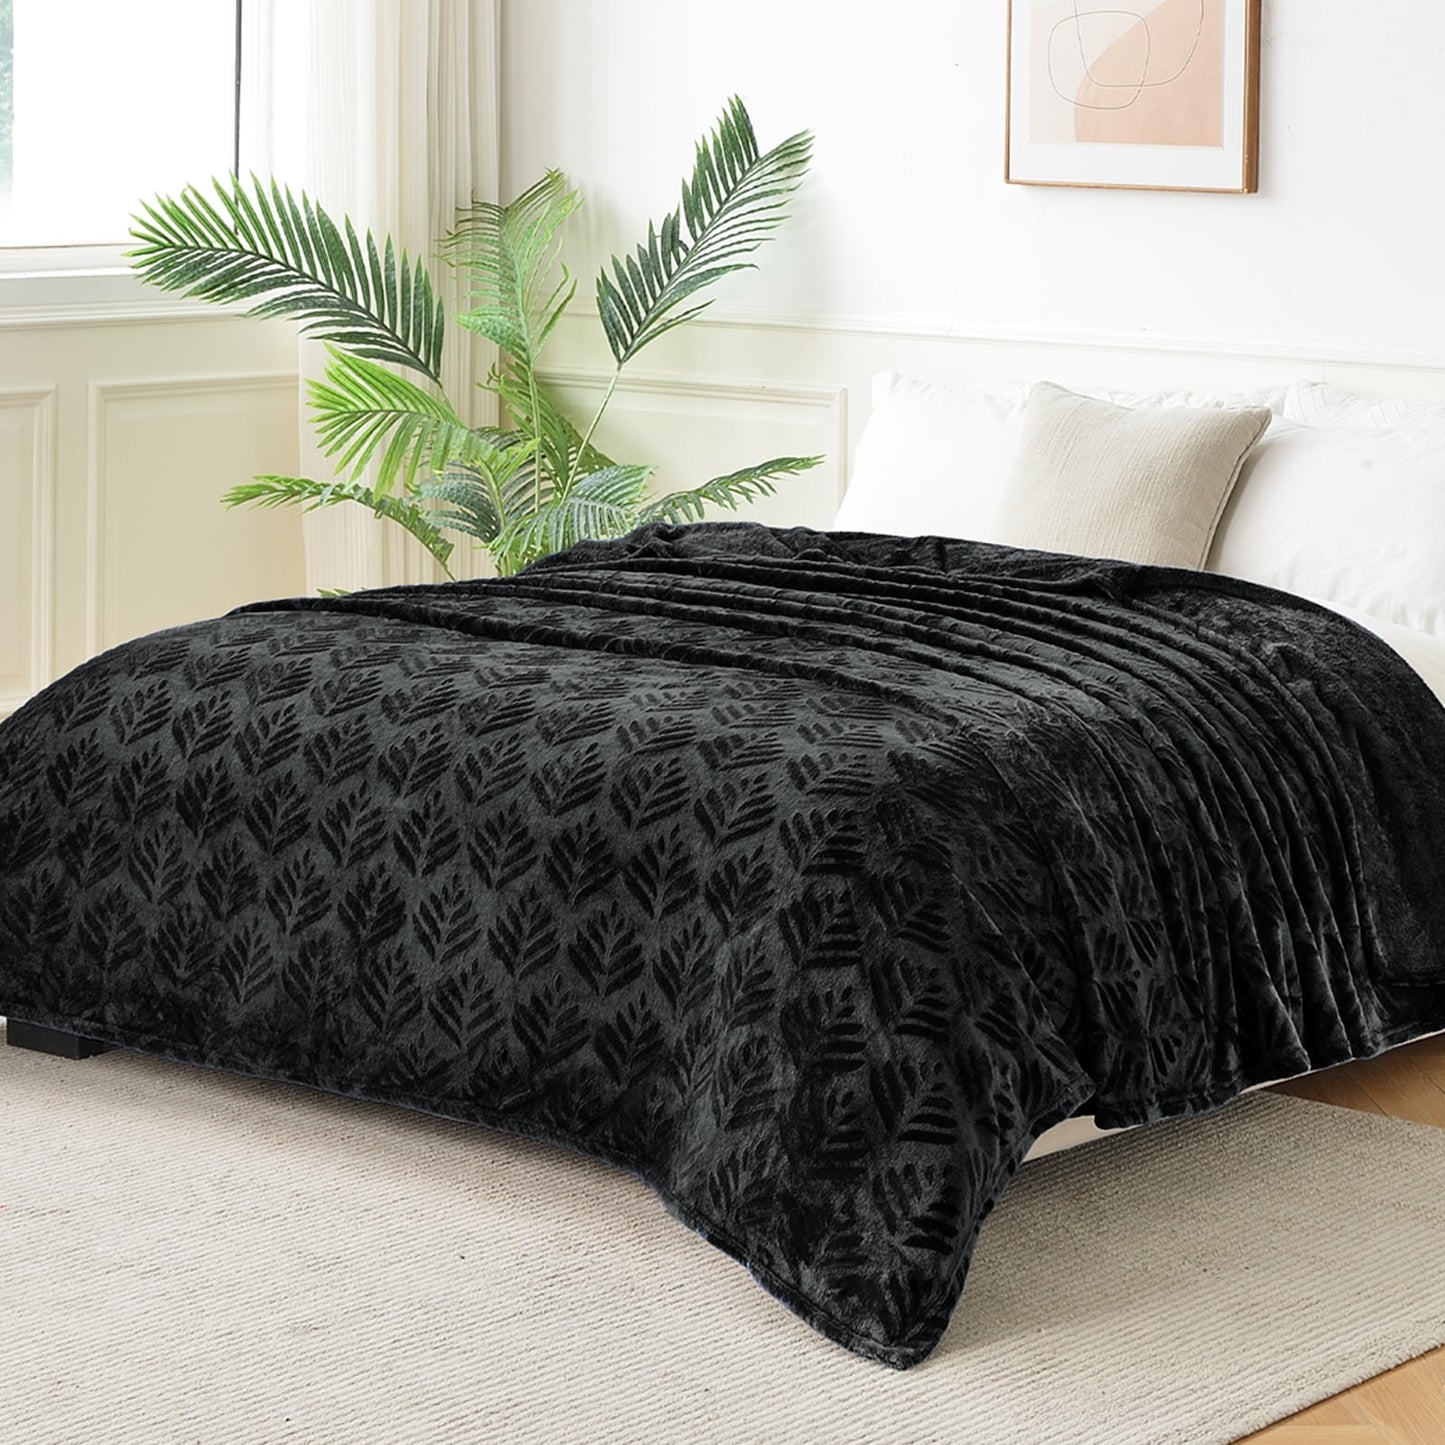 Exclusivo Mezcla King size Fleece Blanket for Bed, Super Soft and Warm Black Blankets for All Seasons, Plush Fuzzy and Thick Flannel Fleece Bed Blanket, 90x104 Inch